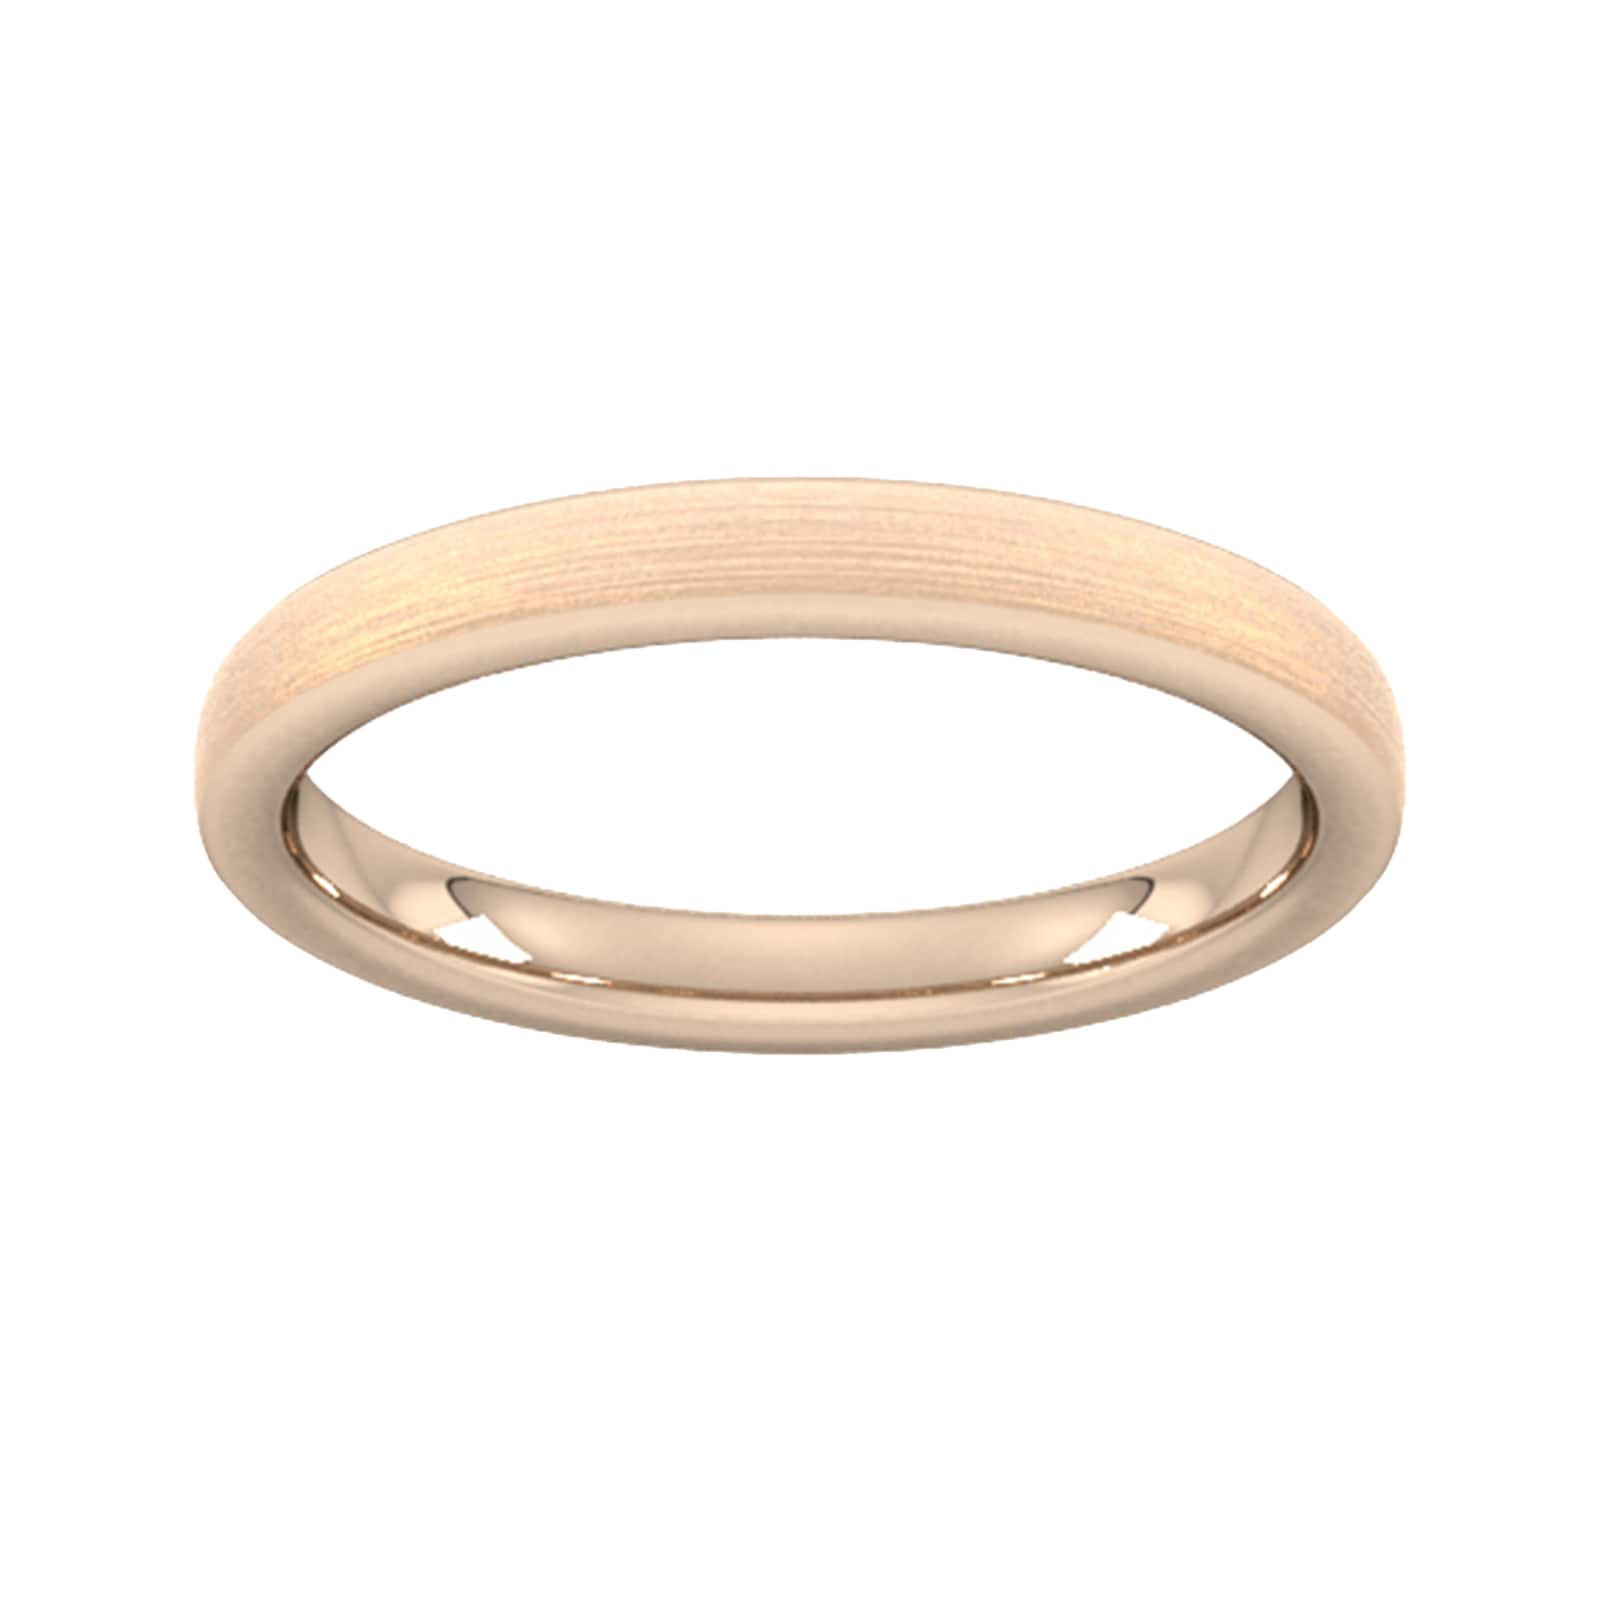 2.5mm Slight Court Standard Polished Chamfered Edges With Matt Centre Wedding Ring In 9 Carat Rose Gold - Ring Size I